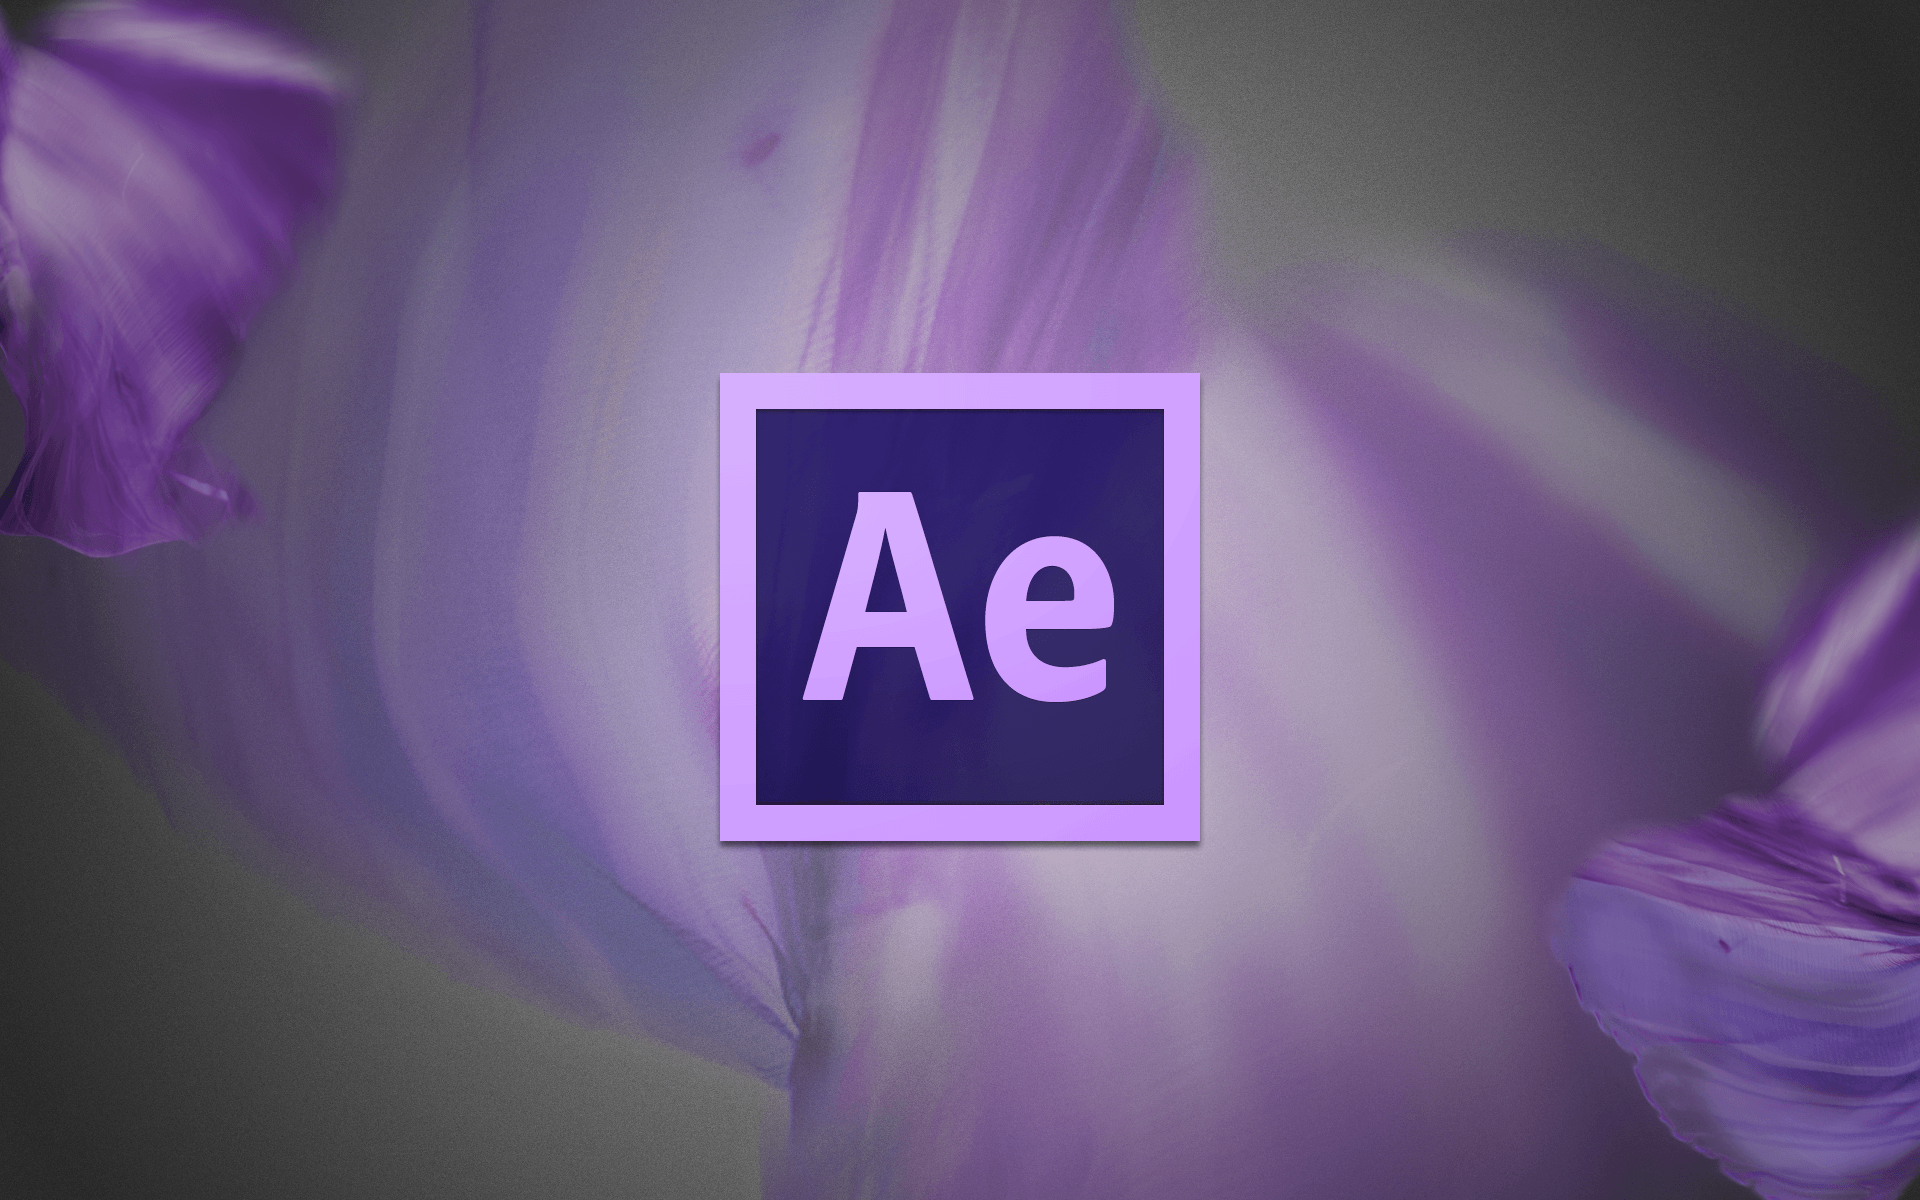 After effects работа. Adobe after Effects. Адоб Афтер эффект. AE Adobe after Effects. Приложение Adobe after Effects.